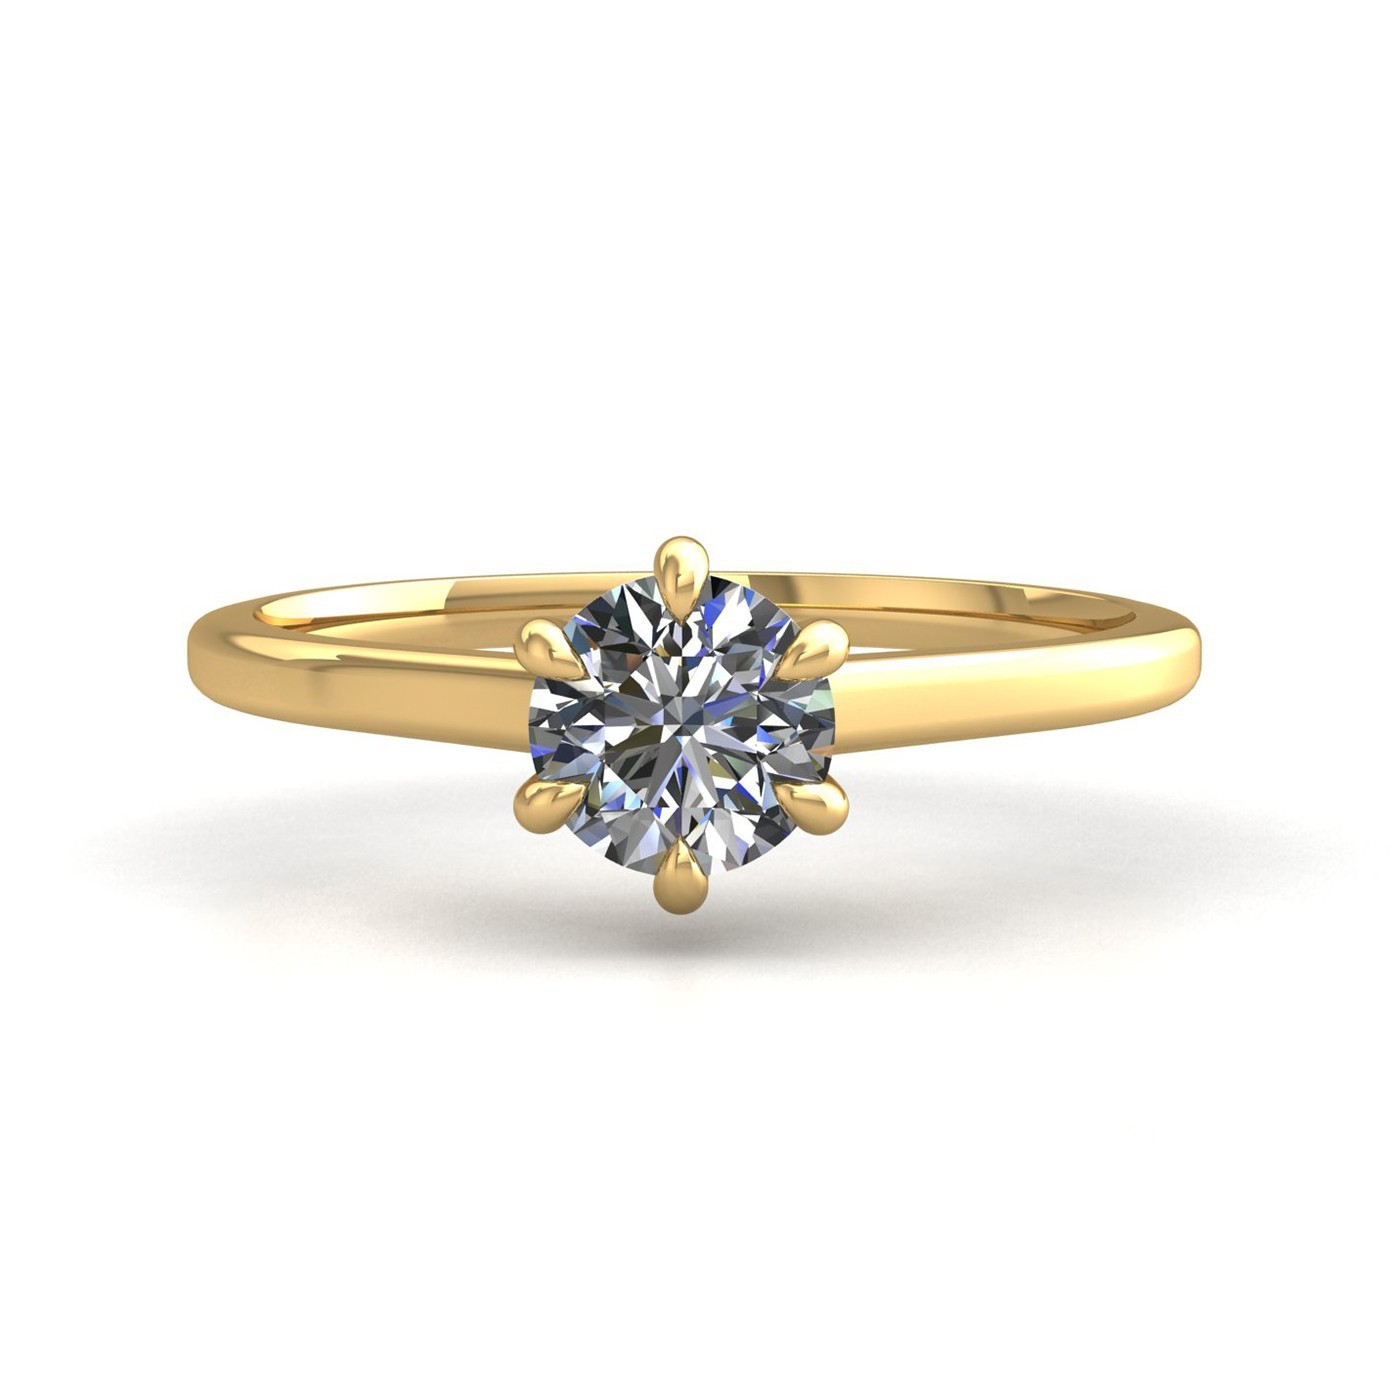 18k yellow gold 2,50 ct 6 prongs solitaire round cut diamond engagement ring with whisper thin band Photos & images